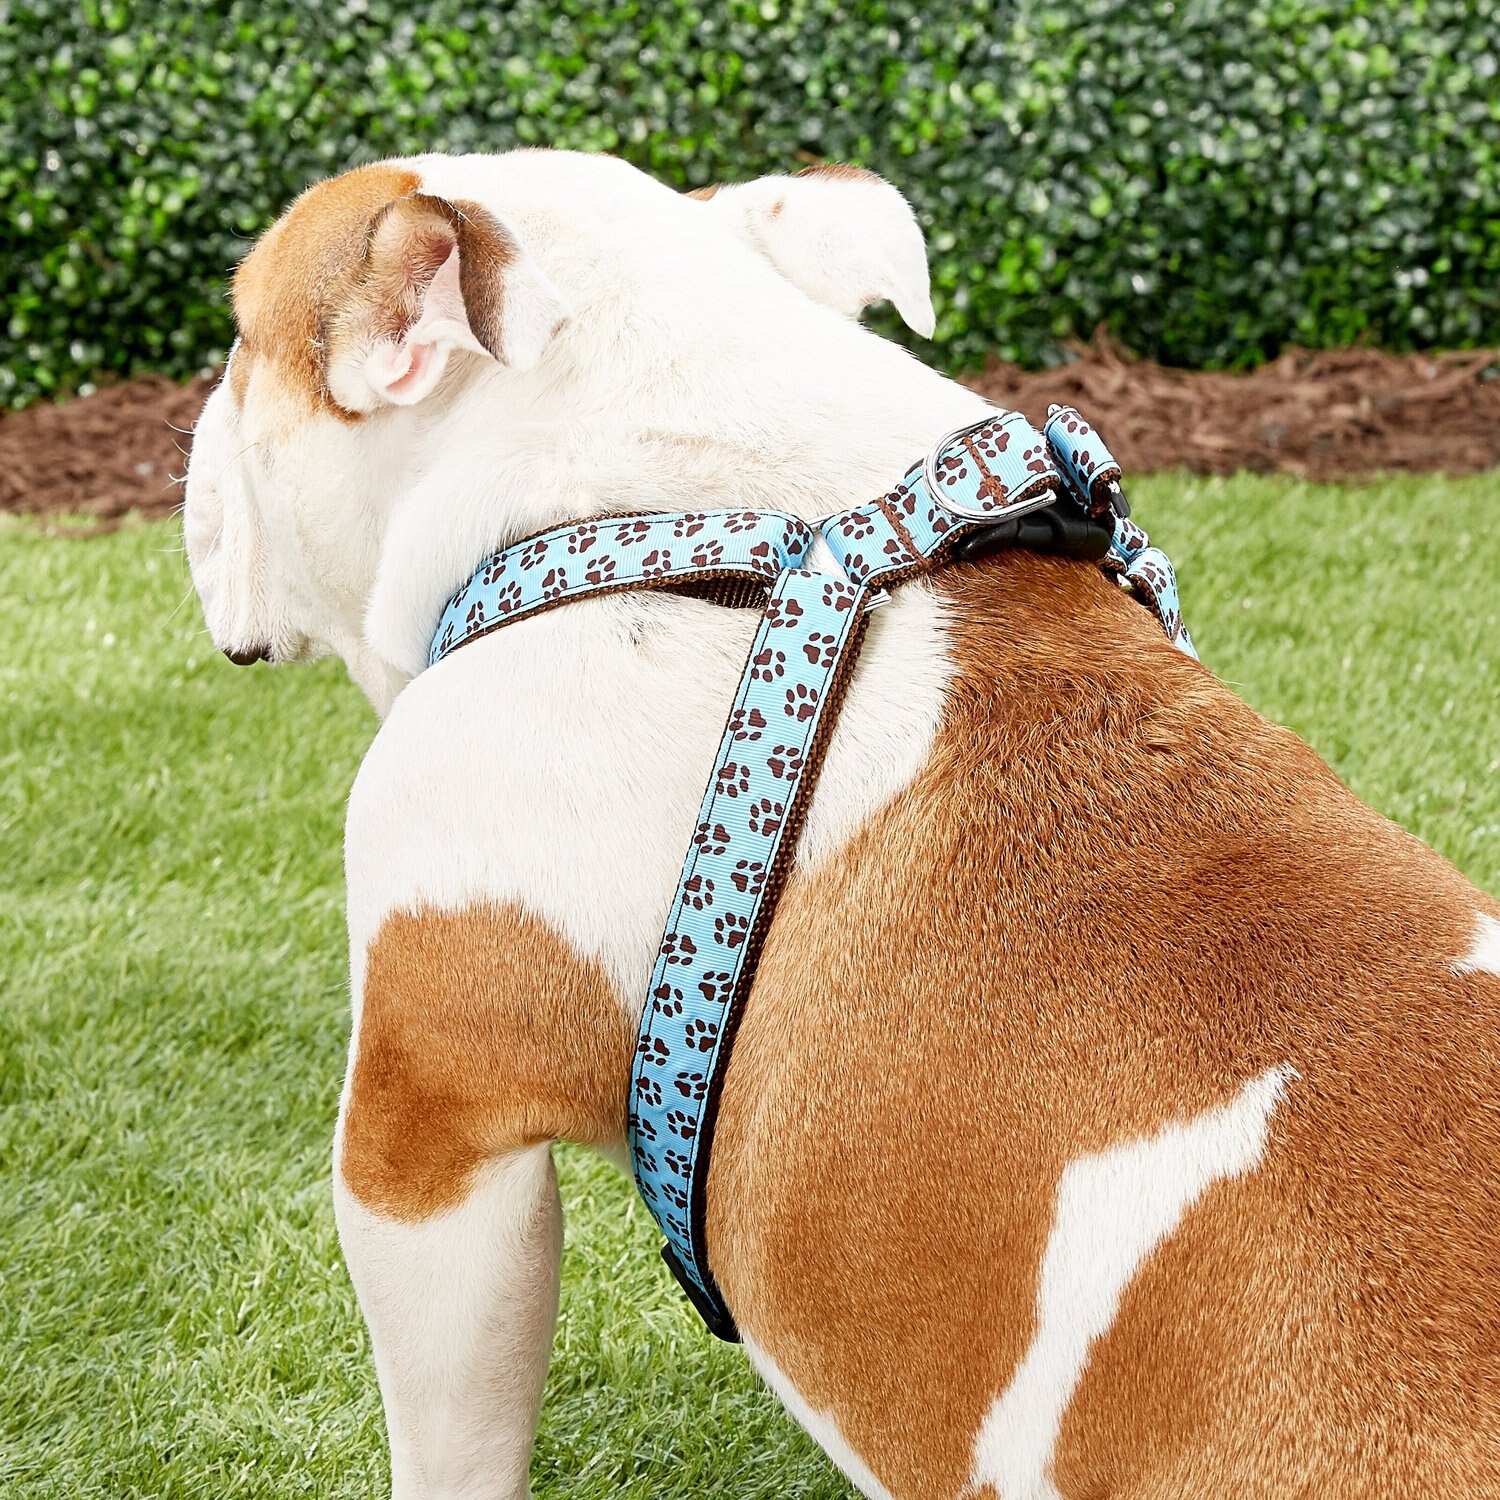 Sassy Dog Wear Puppy Paws Dog Harness, Blue & Brown, Large - Chewy.com